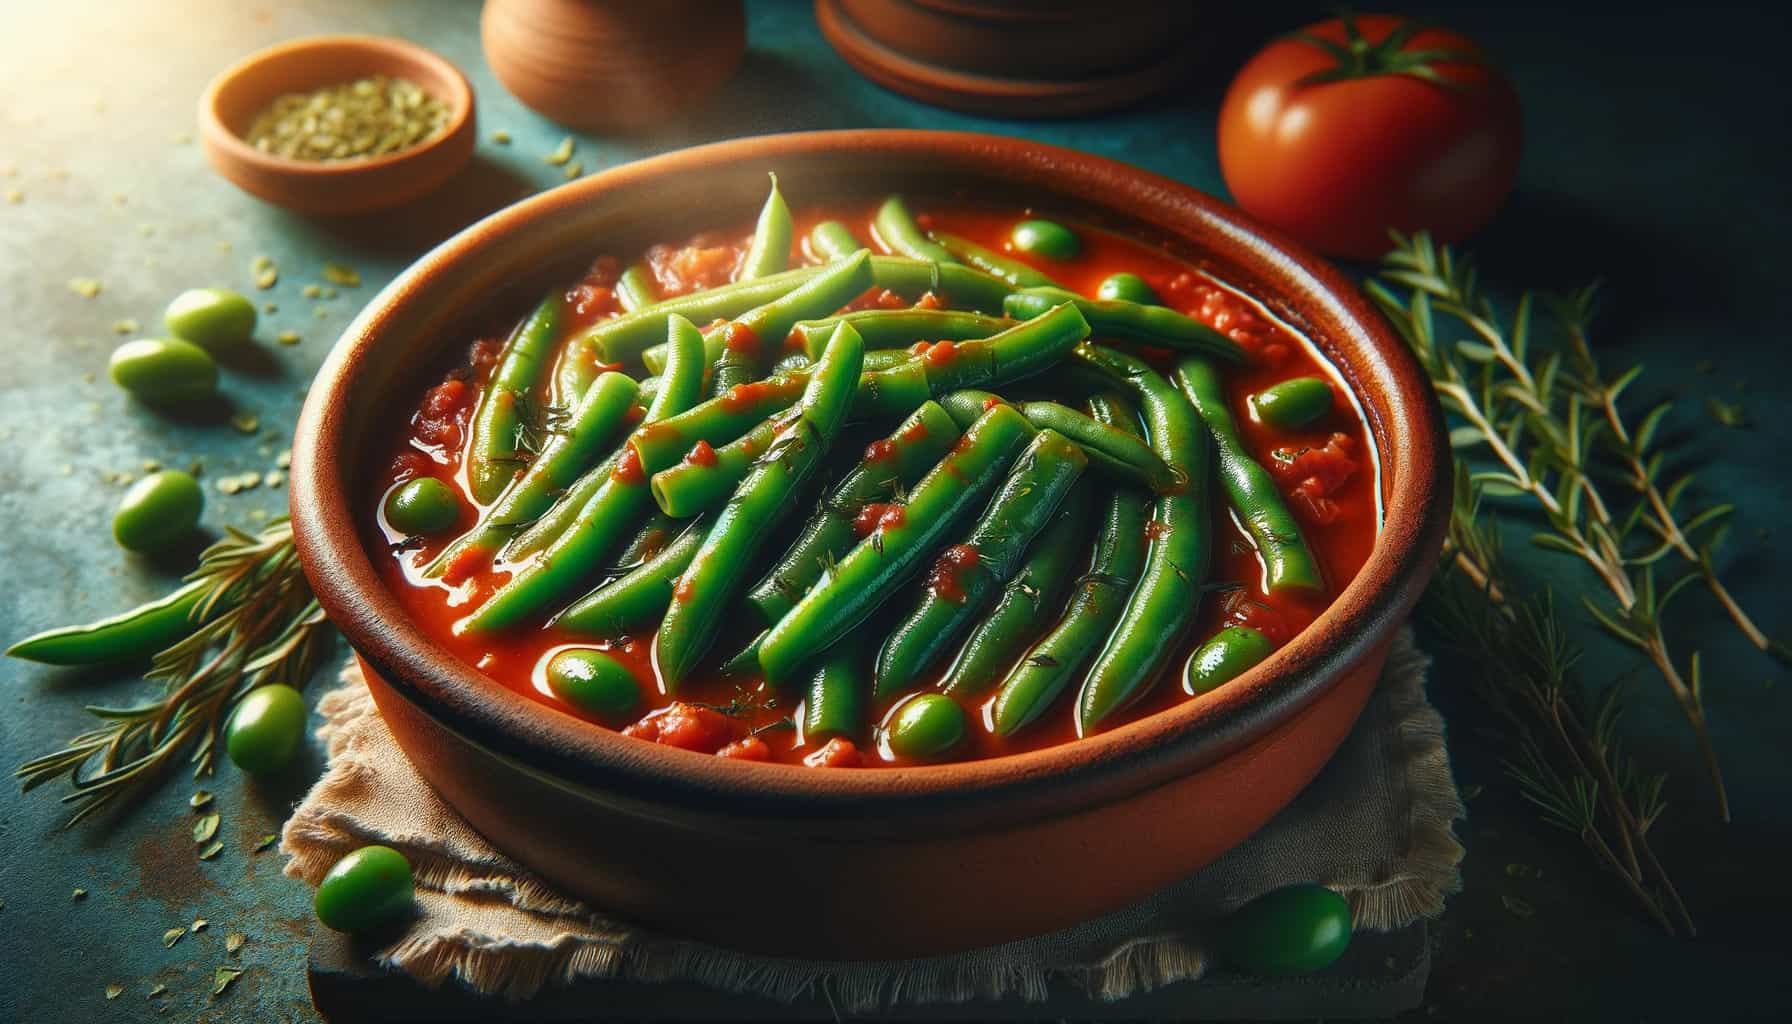 Greek-style green beans (fasolakia) in a traditional clay pot. The tender and juicy beans are submerged in a thick tomato sauce with herbs like rosemary and parsley sprinkled on top.